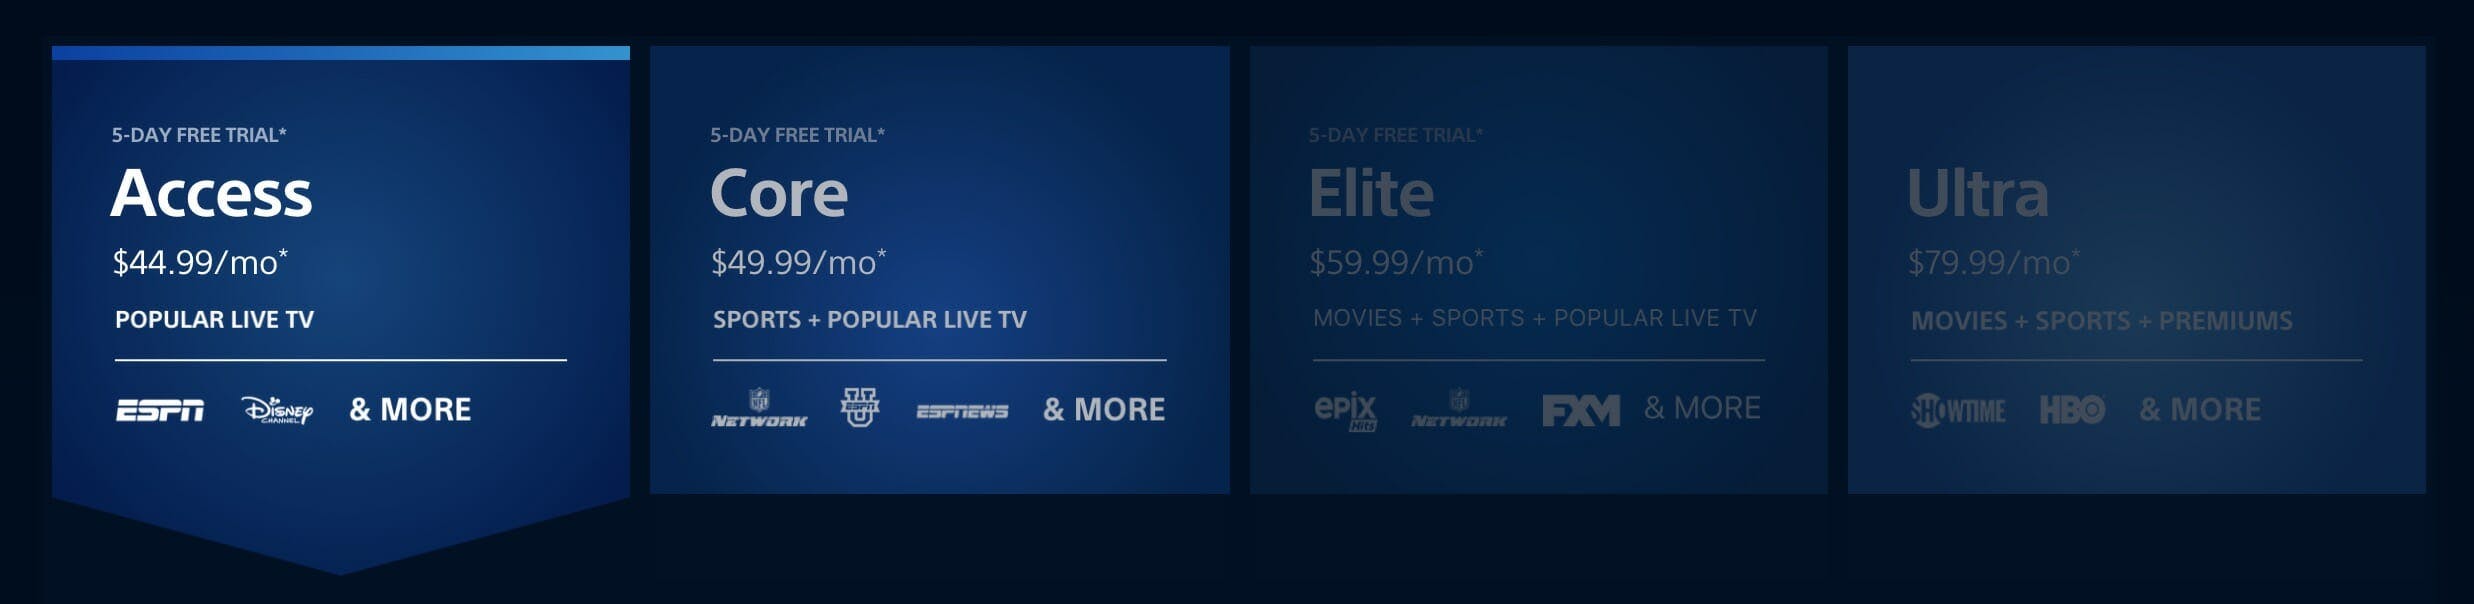 PS Vue packages cost